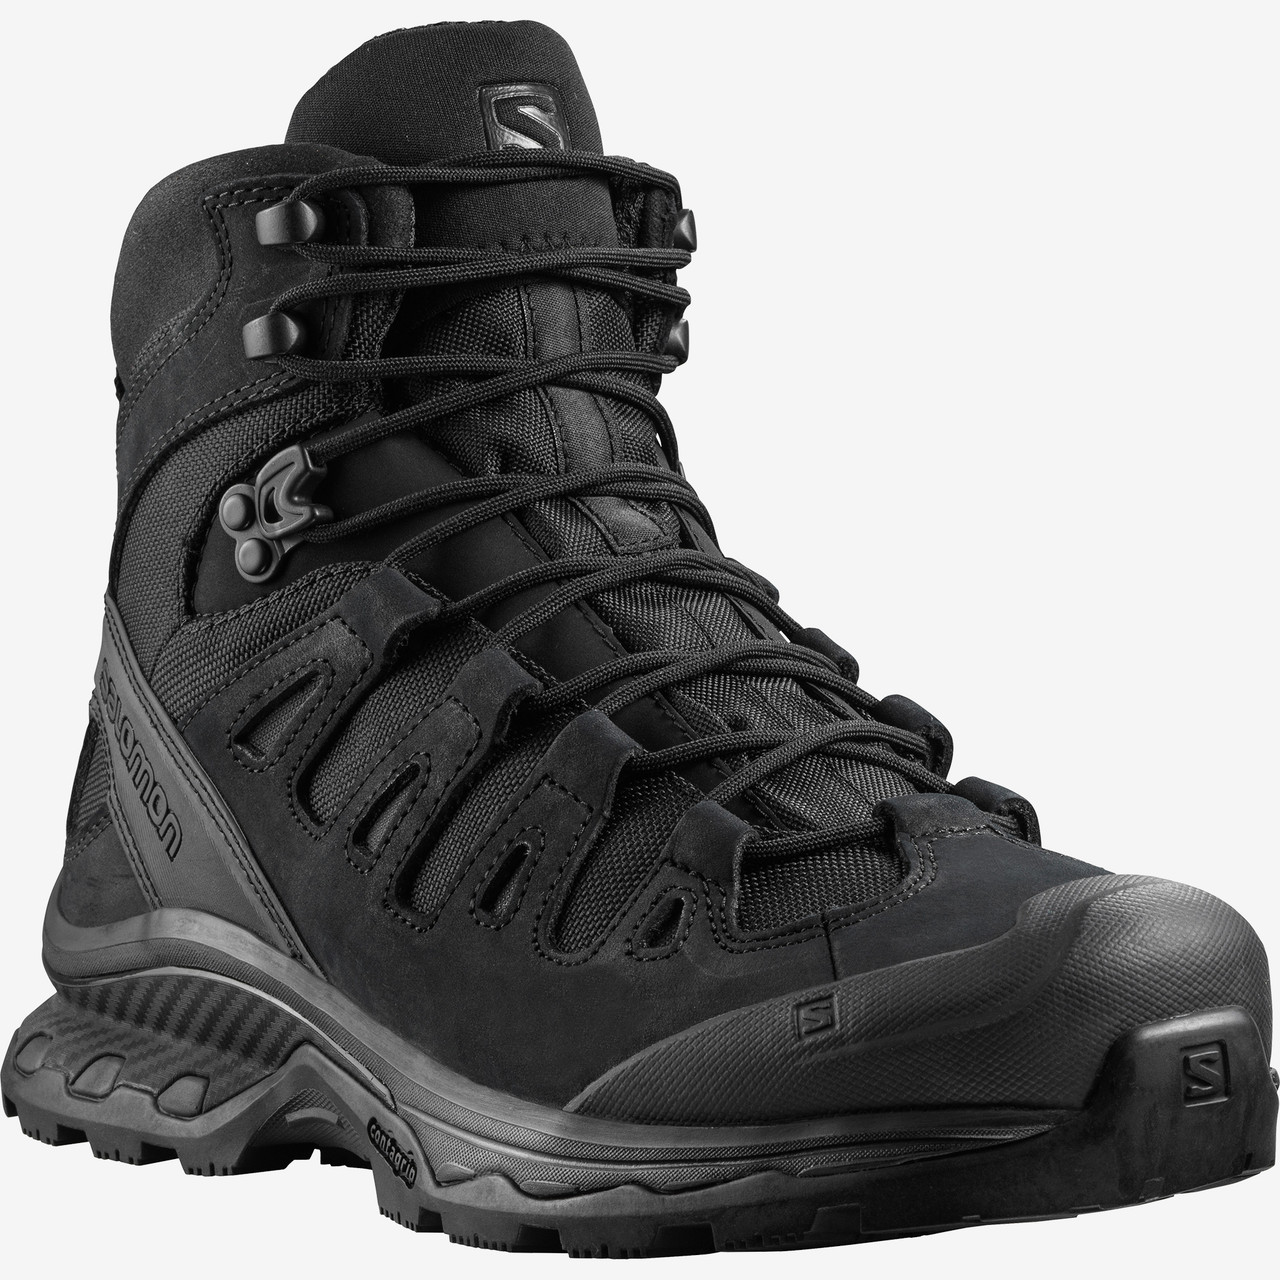 Institut straf gryde Salomon L40682500 Quest 4D Forces 2 EN Unisex 6 inch Boots, Uniform or  Casual, Oil and Slip Resistant, available in Black and Ranger Green - Dana  Safety Supply